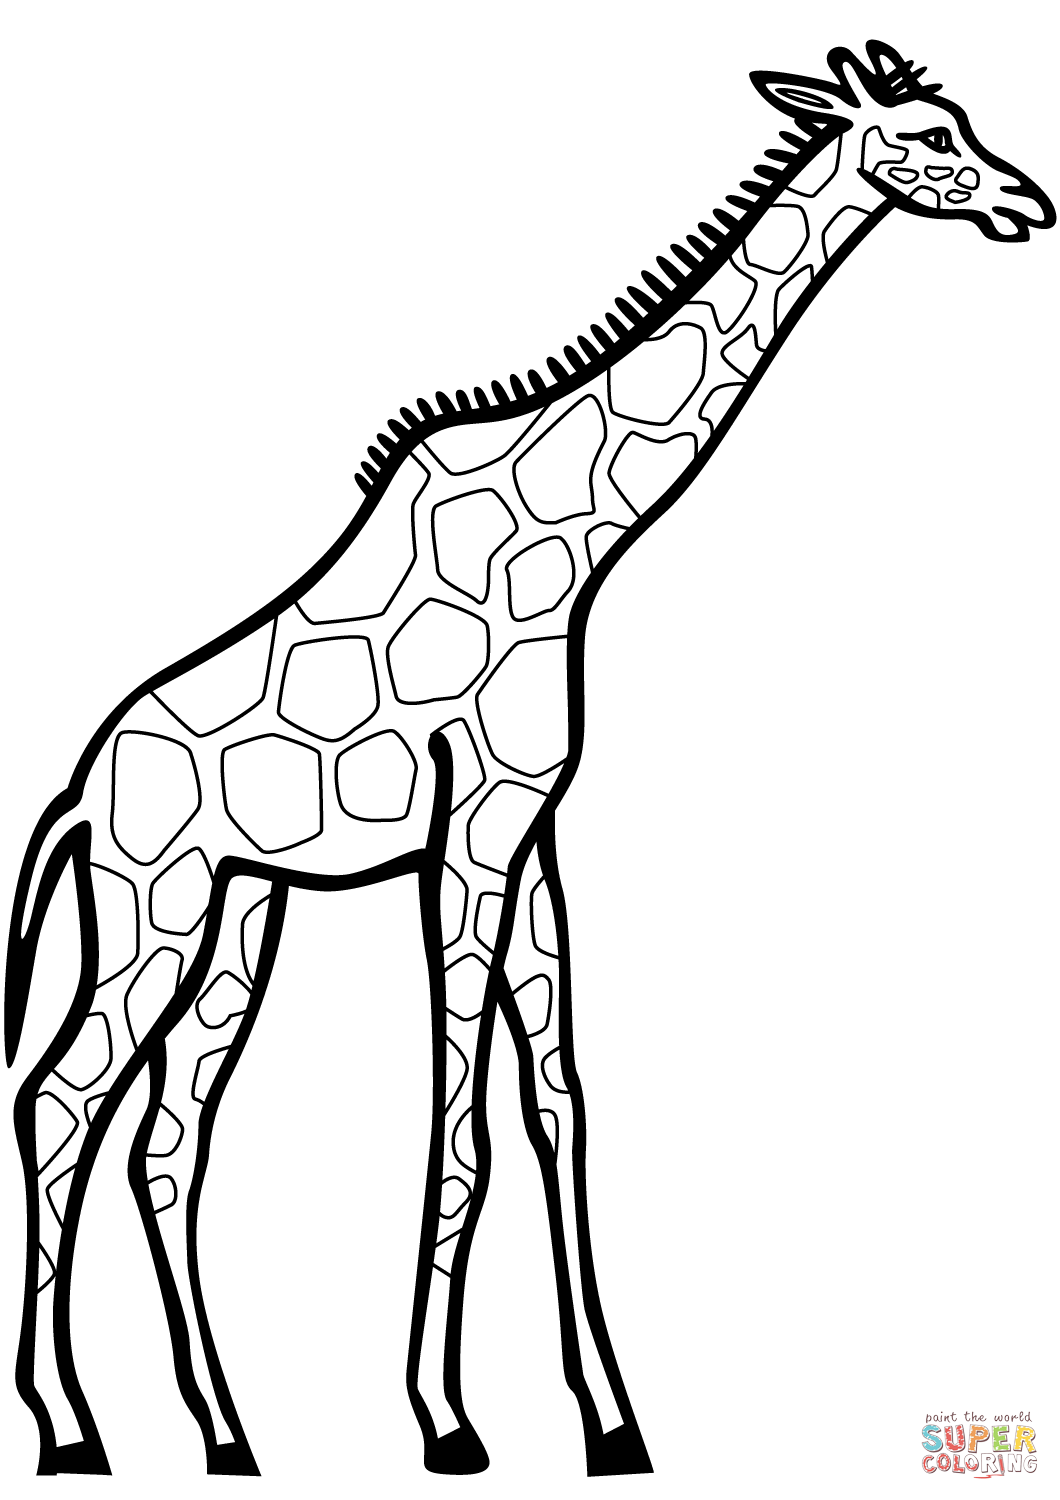 Giraffe coloring page | Free Printable Coloring Pages